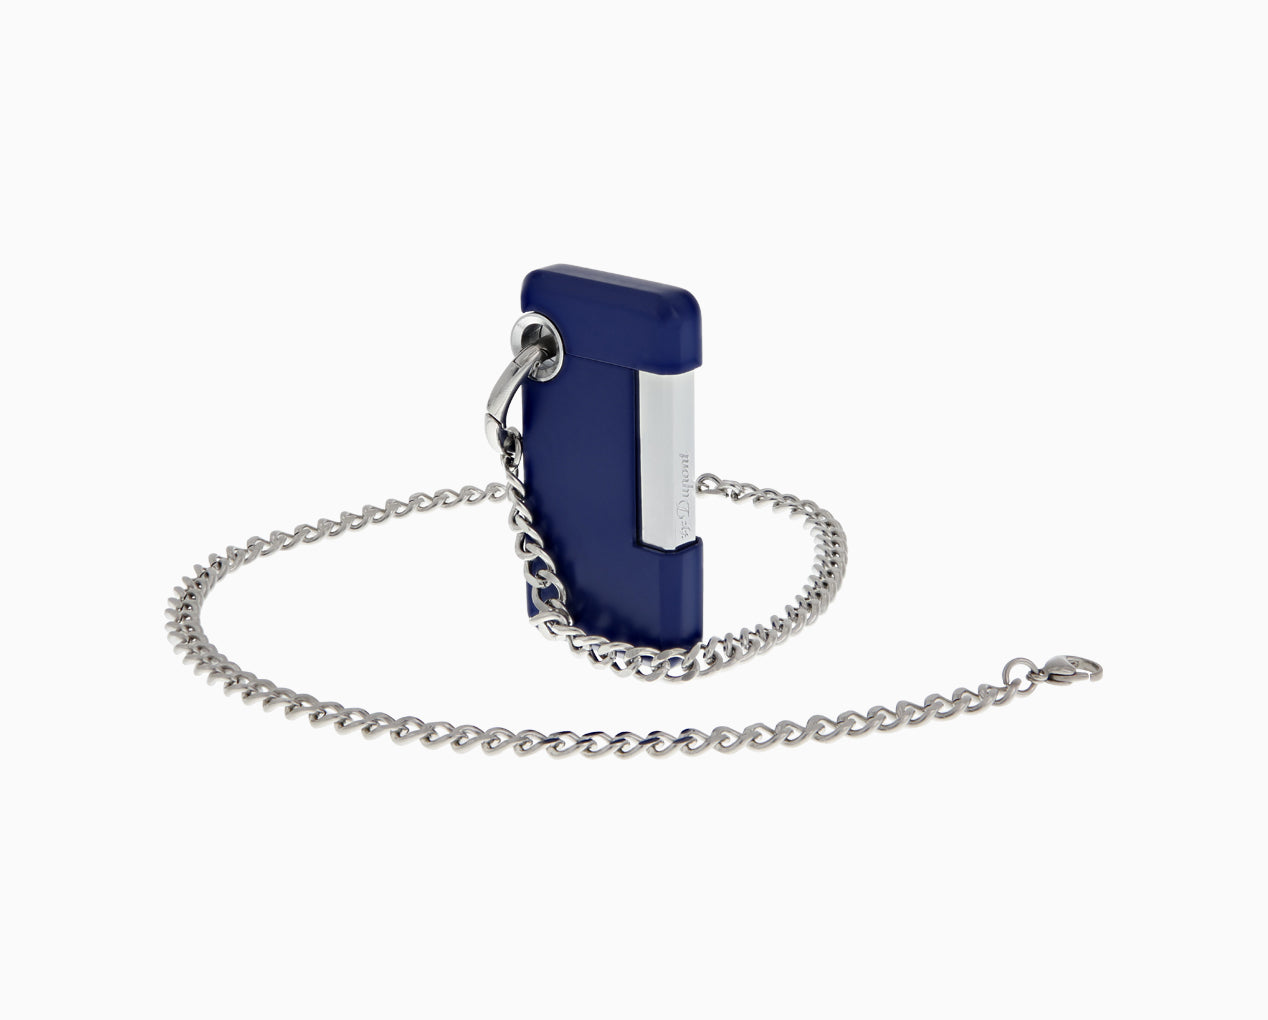 Hooked lighter chain – Accessories | S.T.